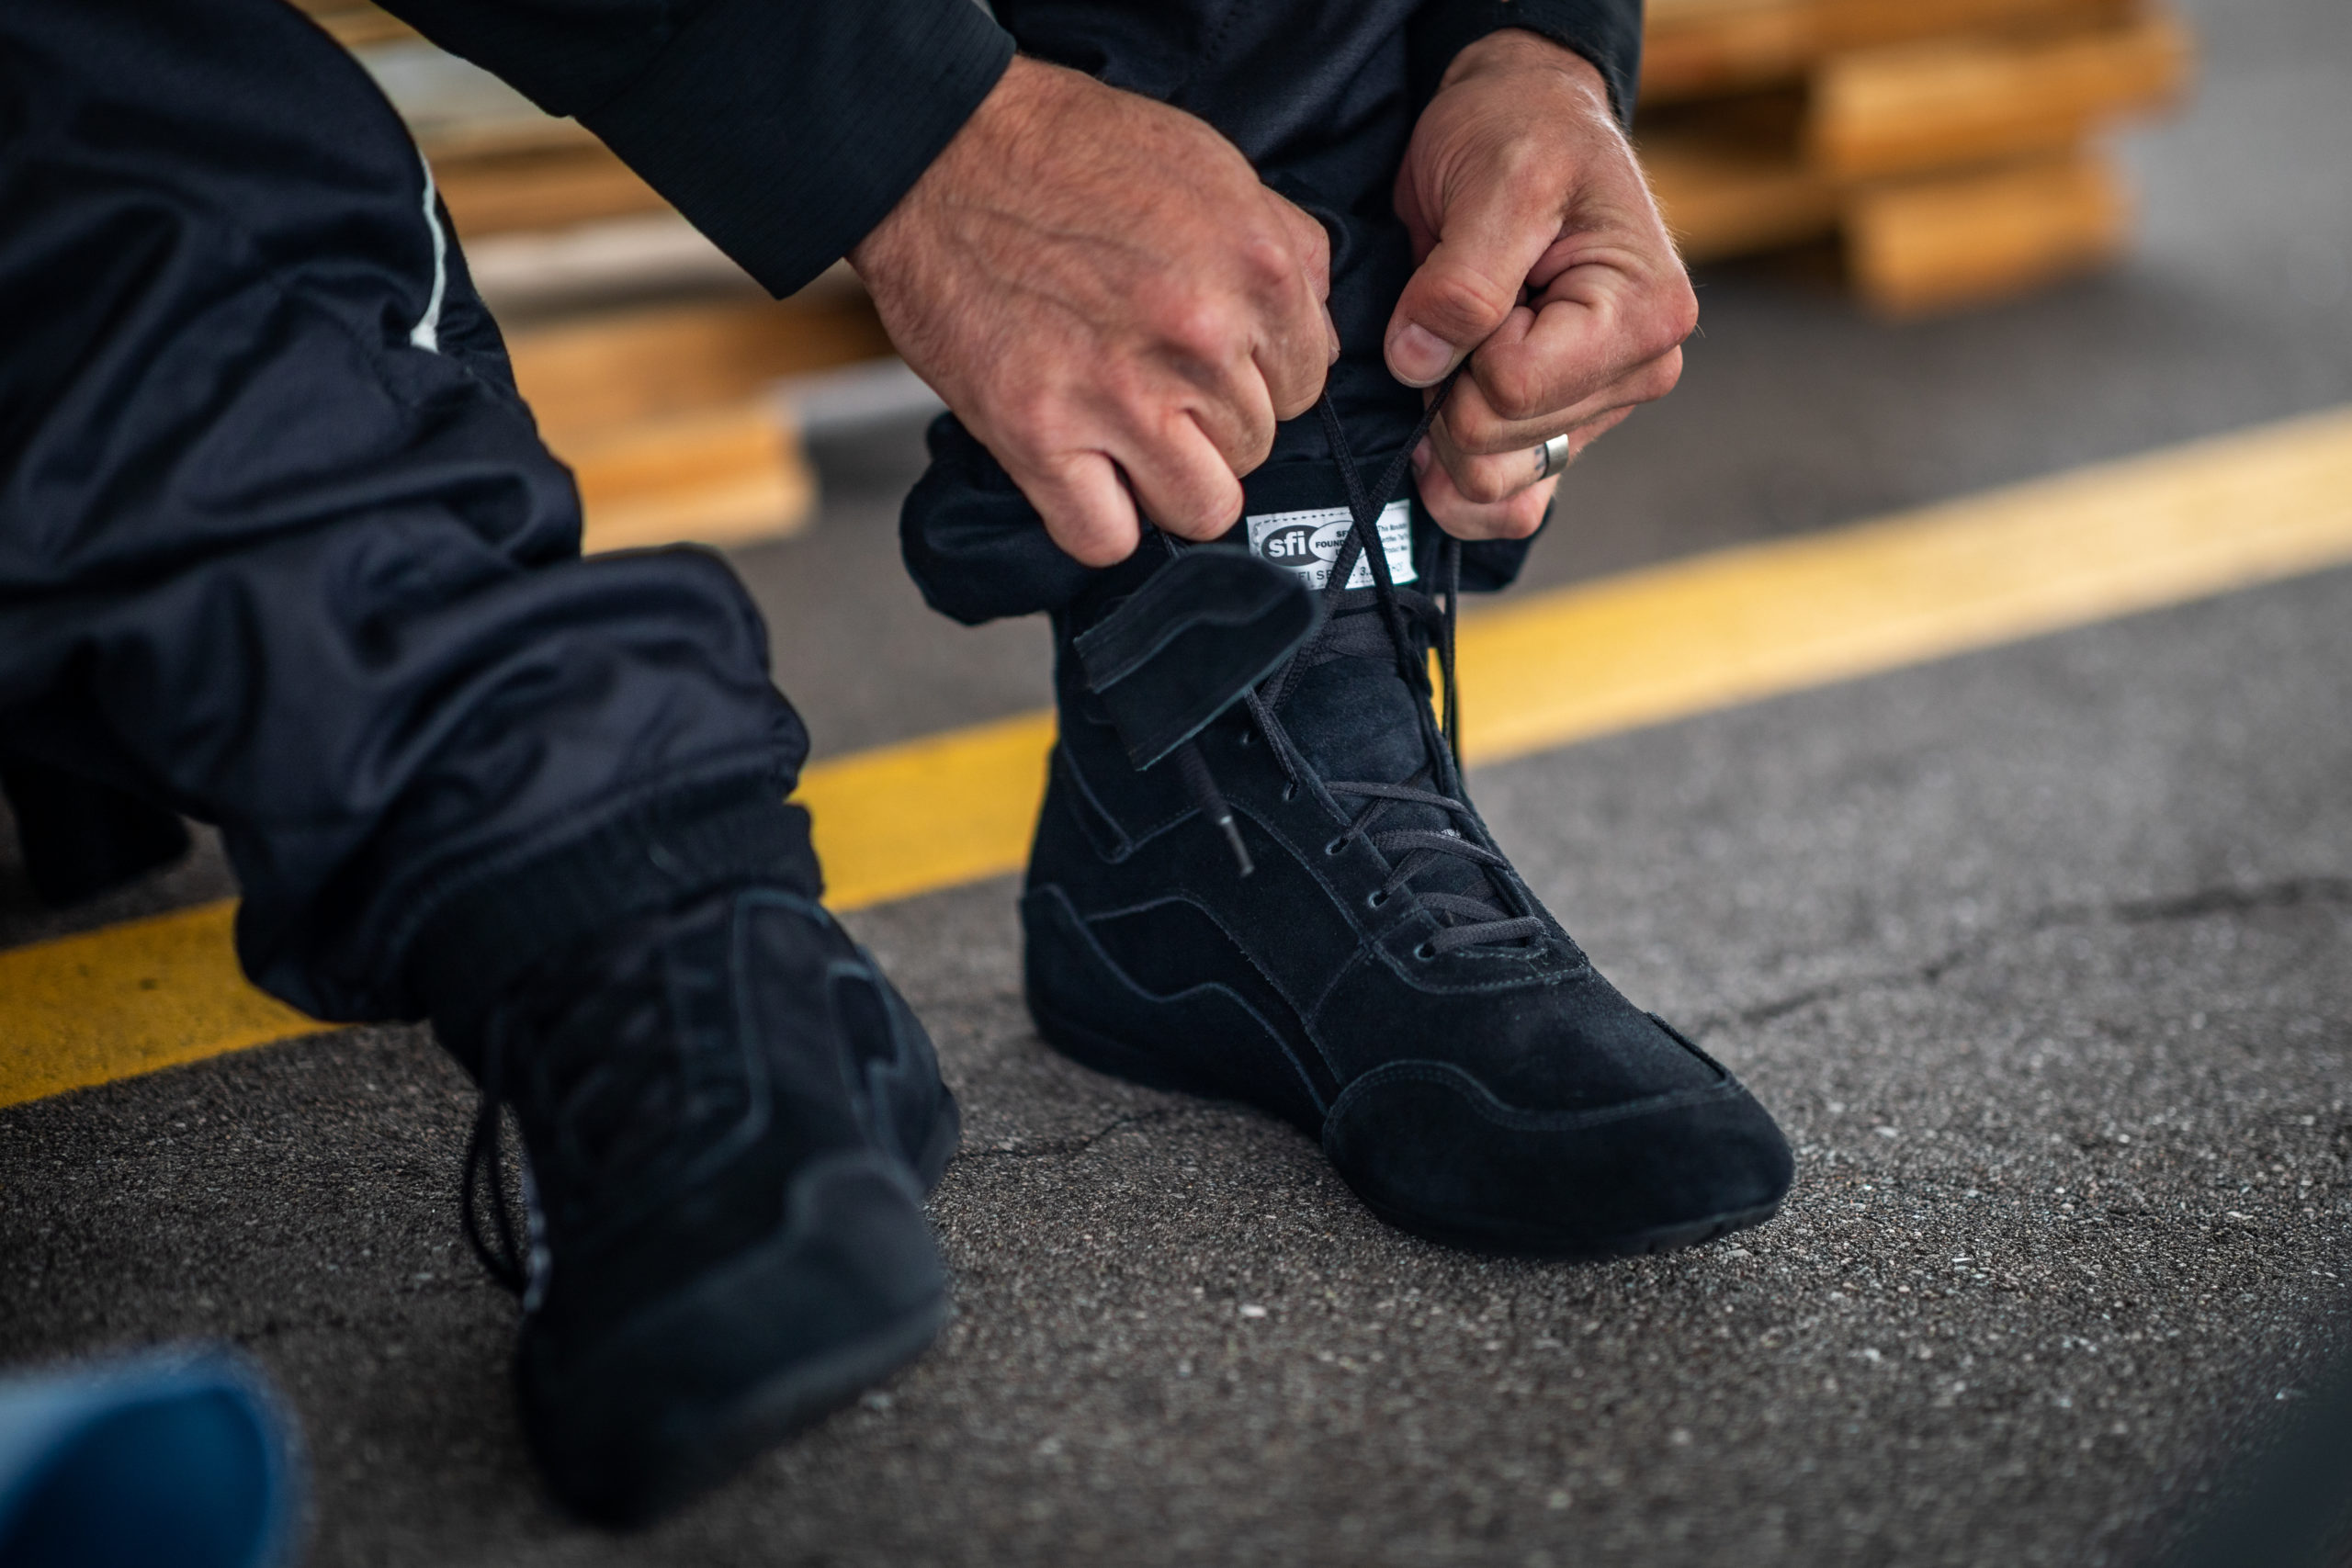 Safety gear for beginners: Driving shoes - Hagerty Motorsports